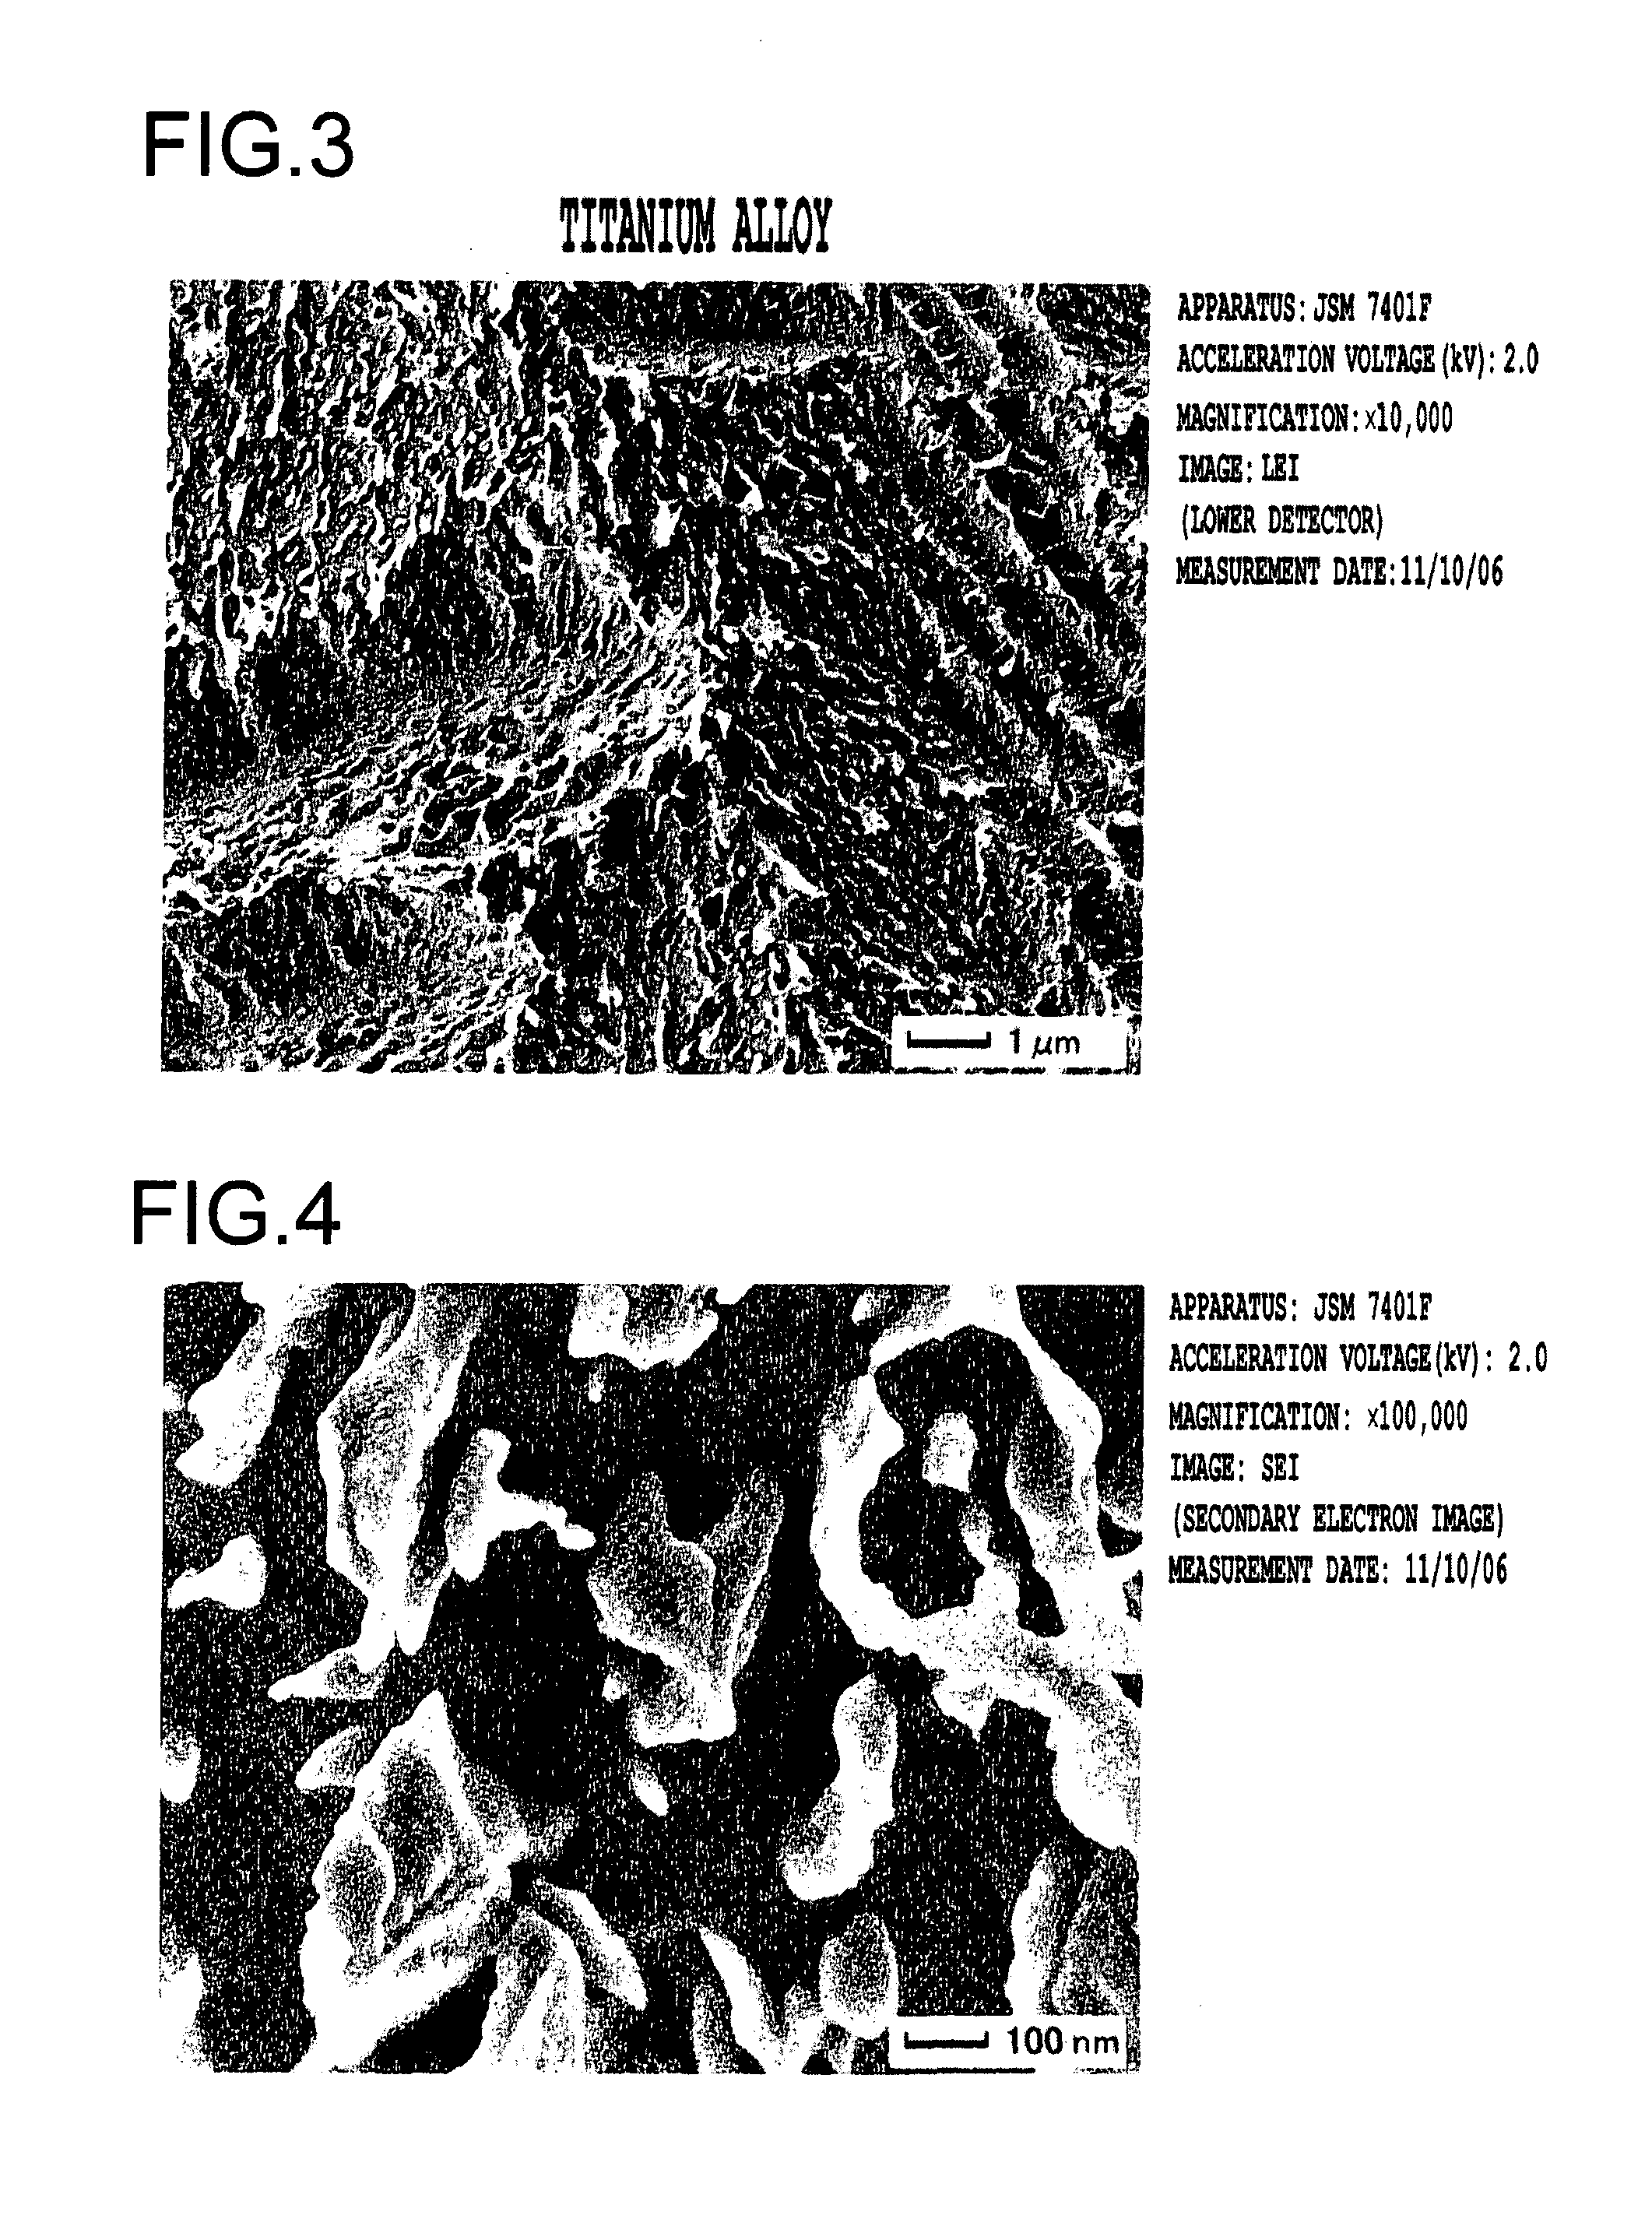 Composite of metal and resin and method for manufacturing the same